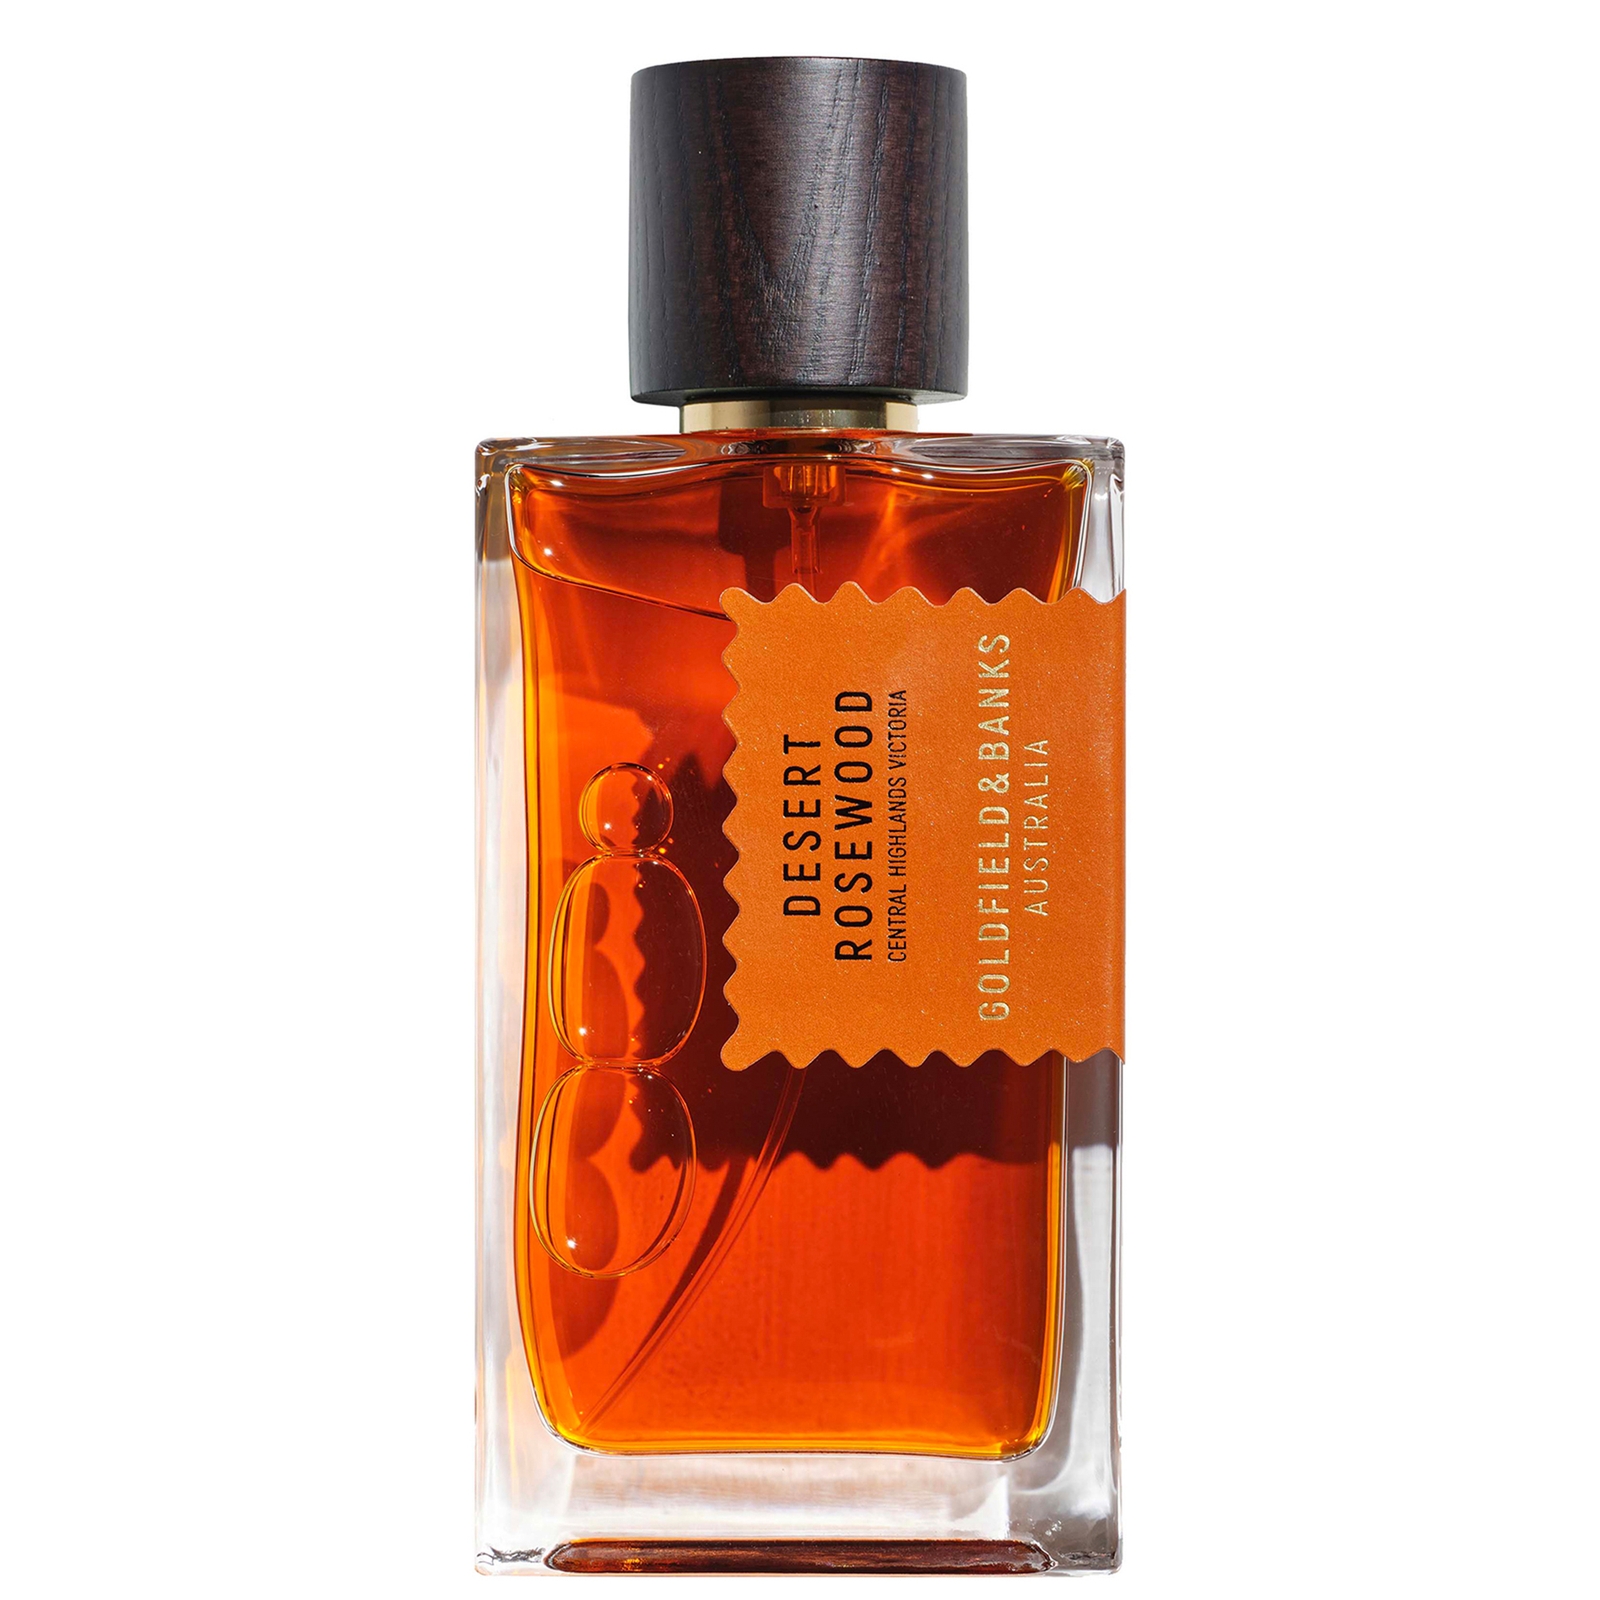 Goldfield & Banks Desert Rosewood Perfume Concentrate 100ml